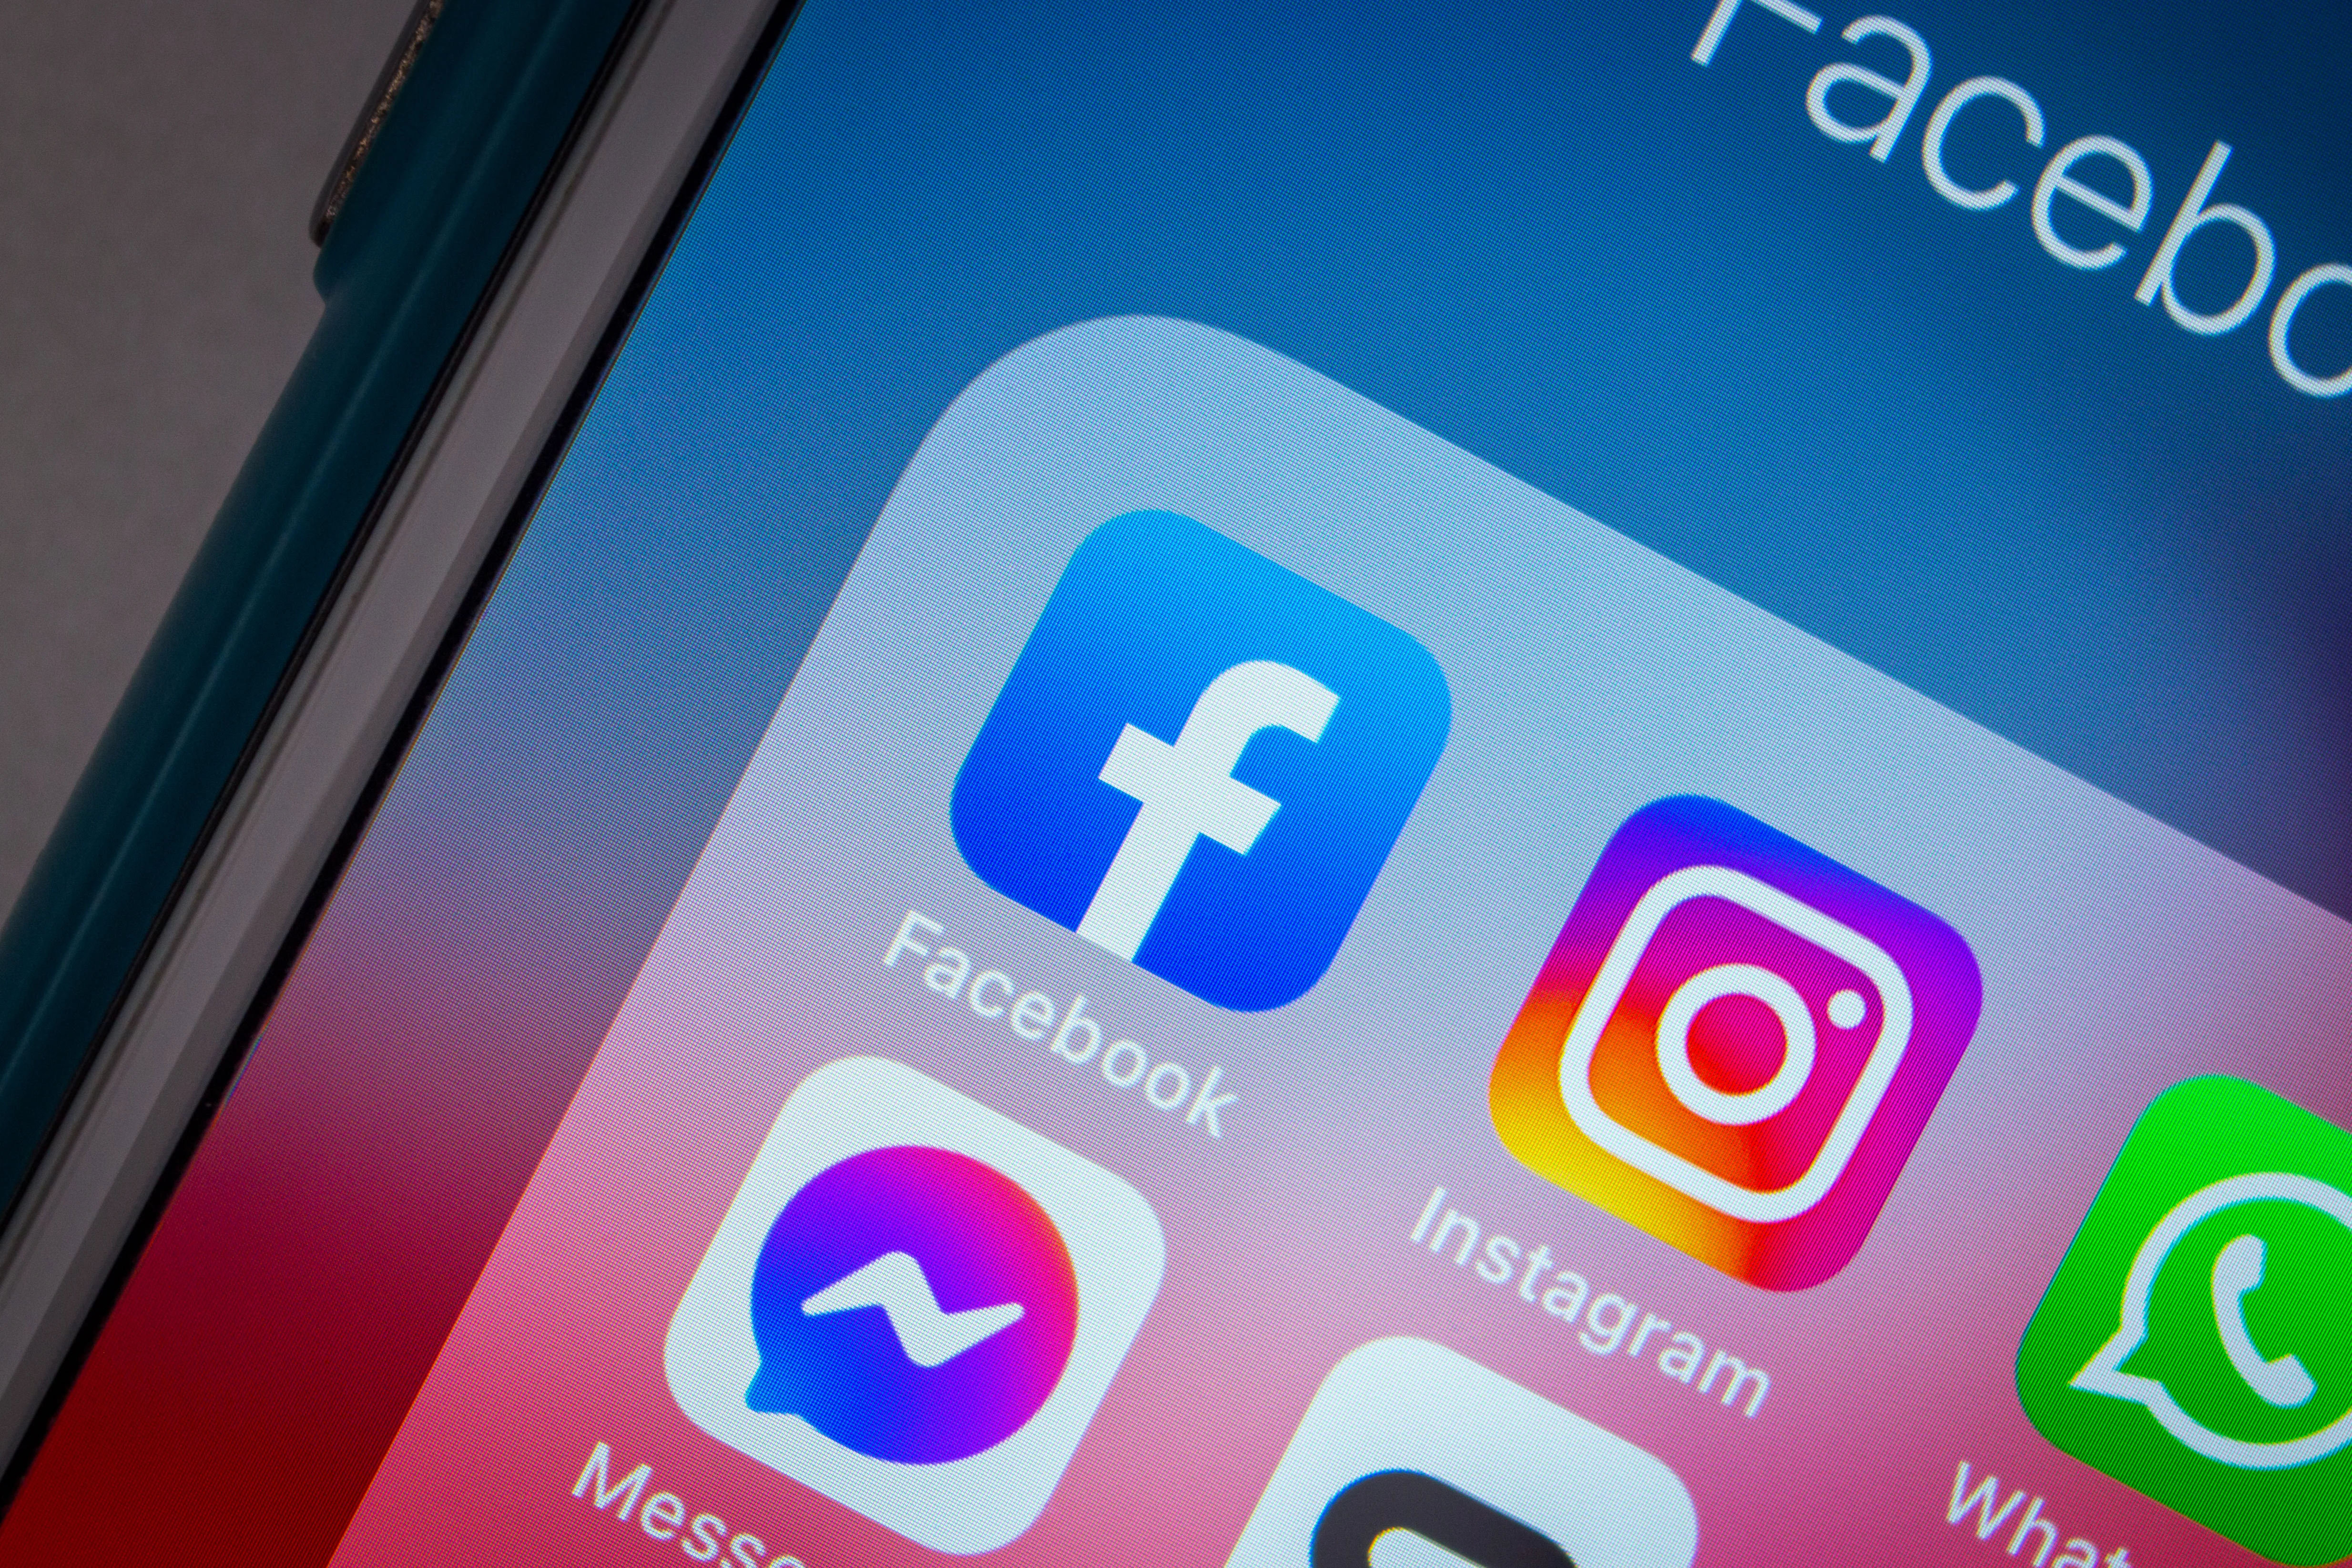 Facebook Announces They’ll Separate Users’ Instagram and Facebook Accounts for Advertisers